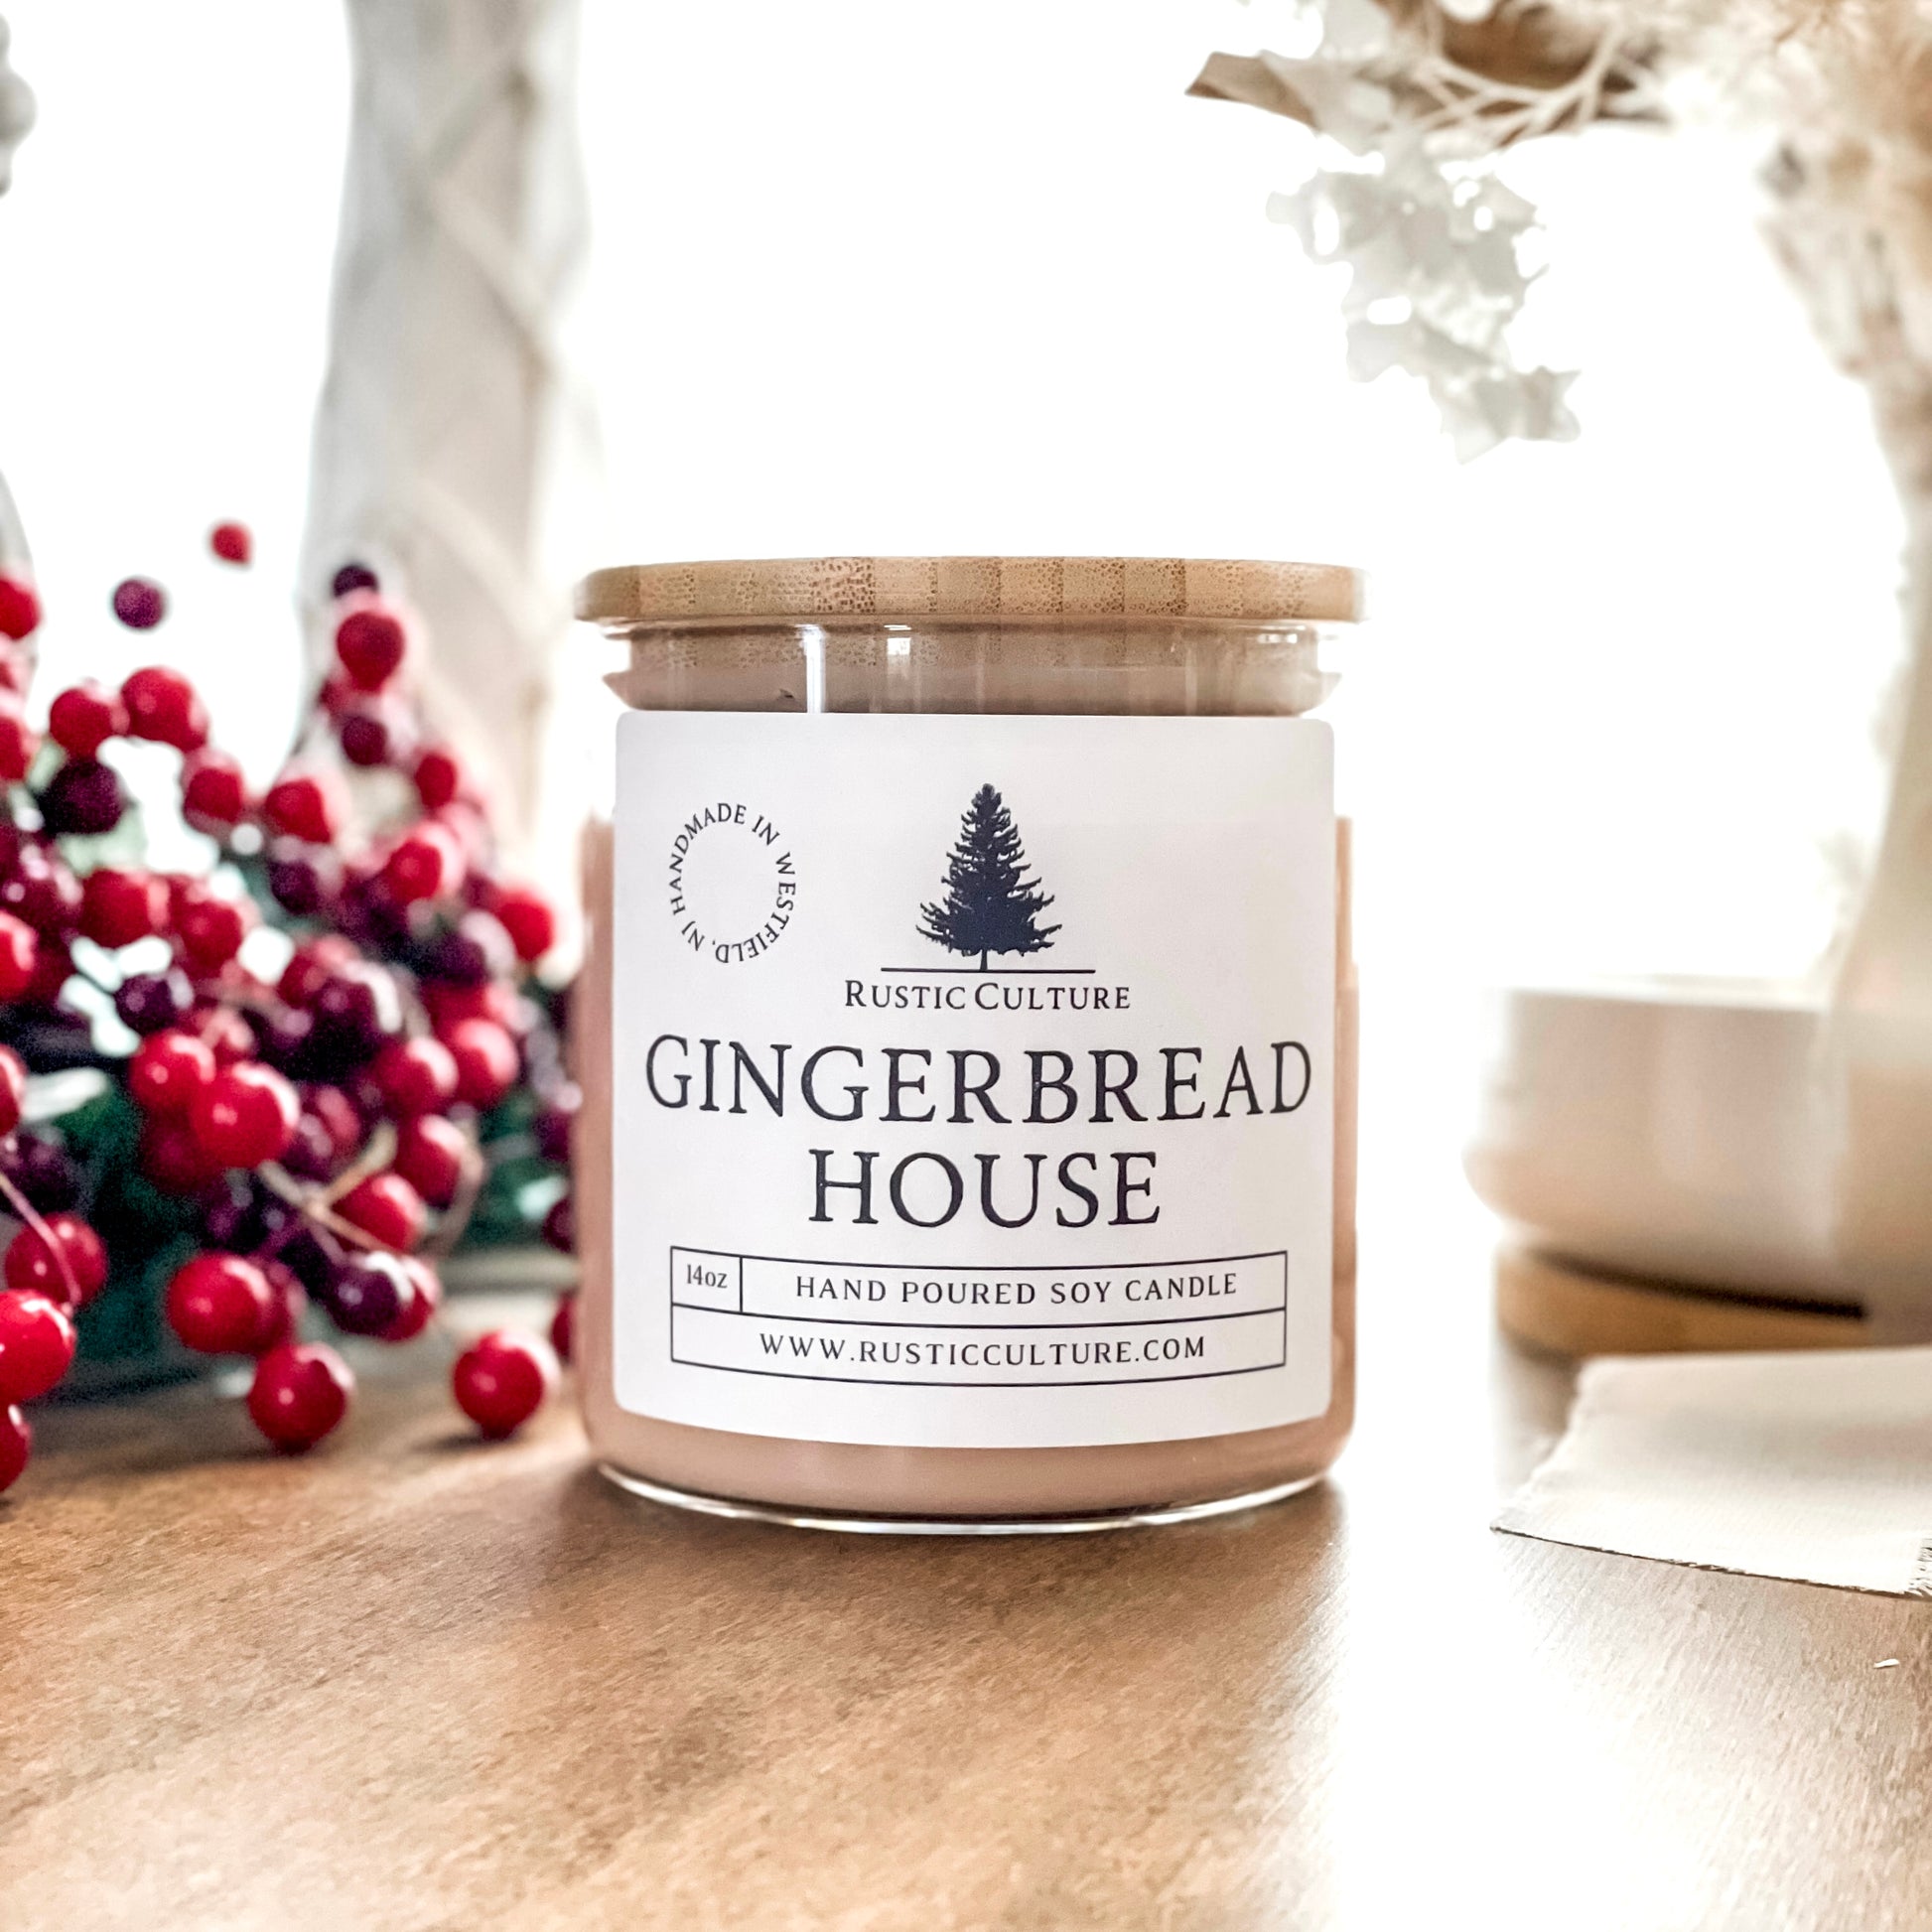 Gingerbread House Candle made with organic soy wax. The perfect Christmas candle!